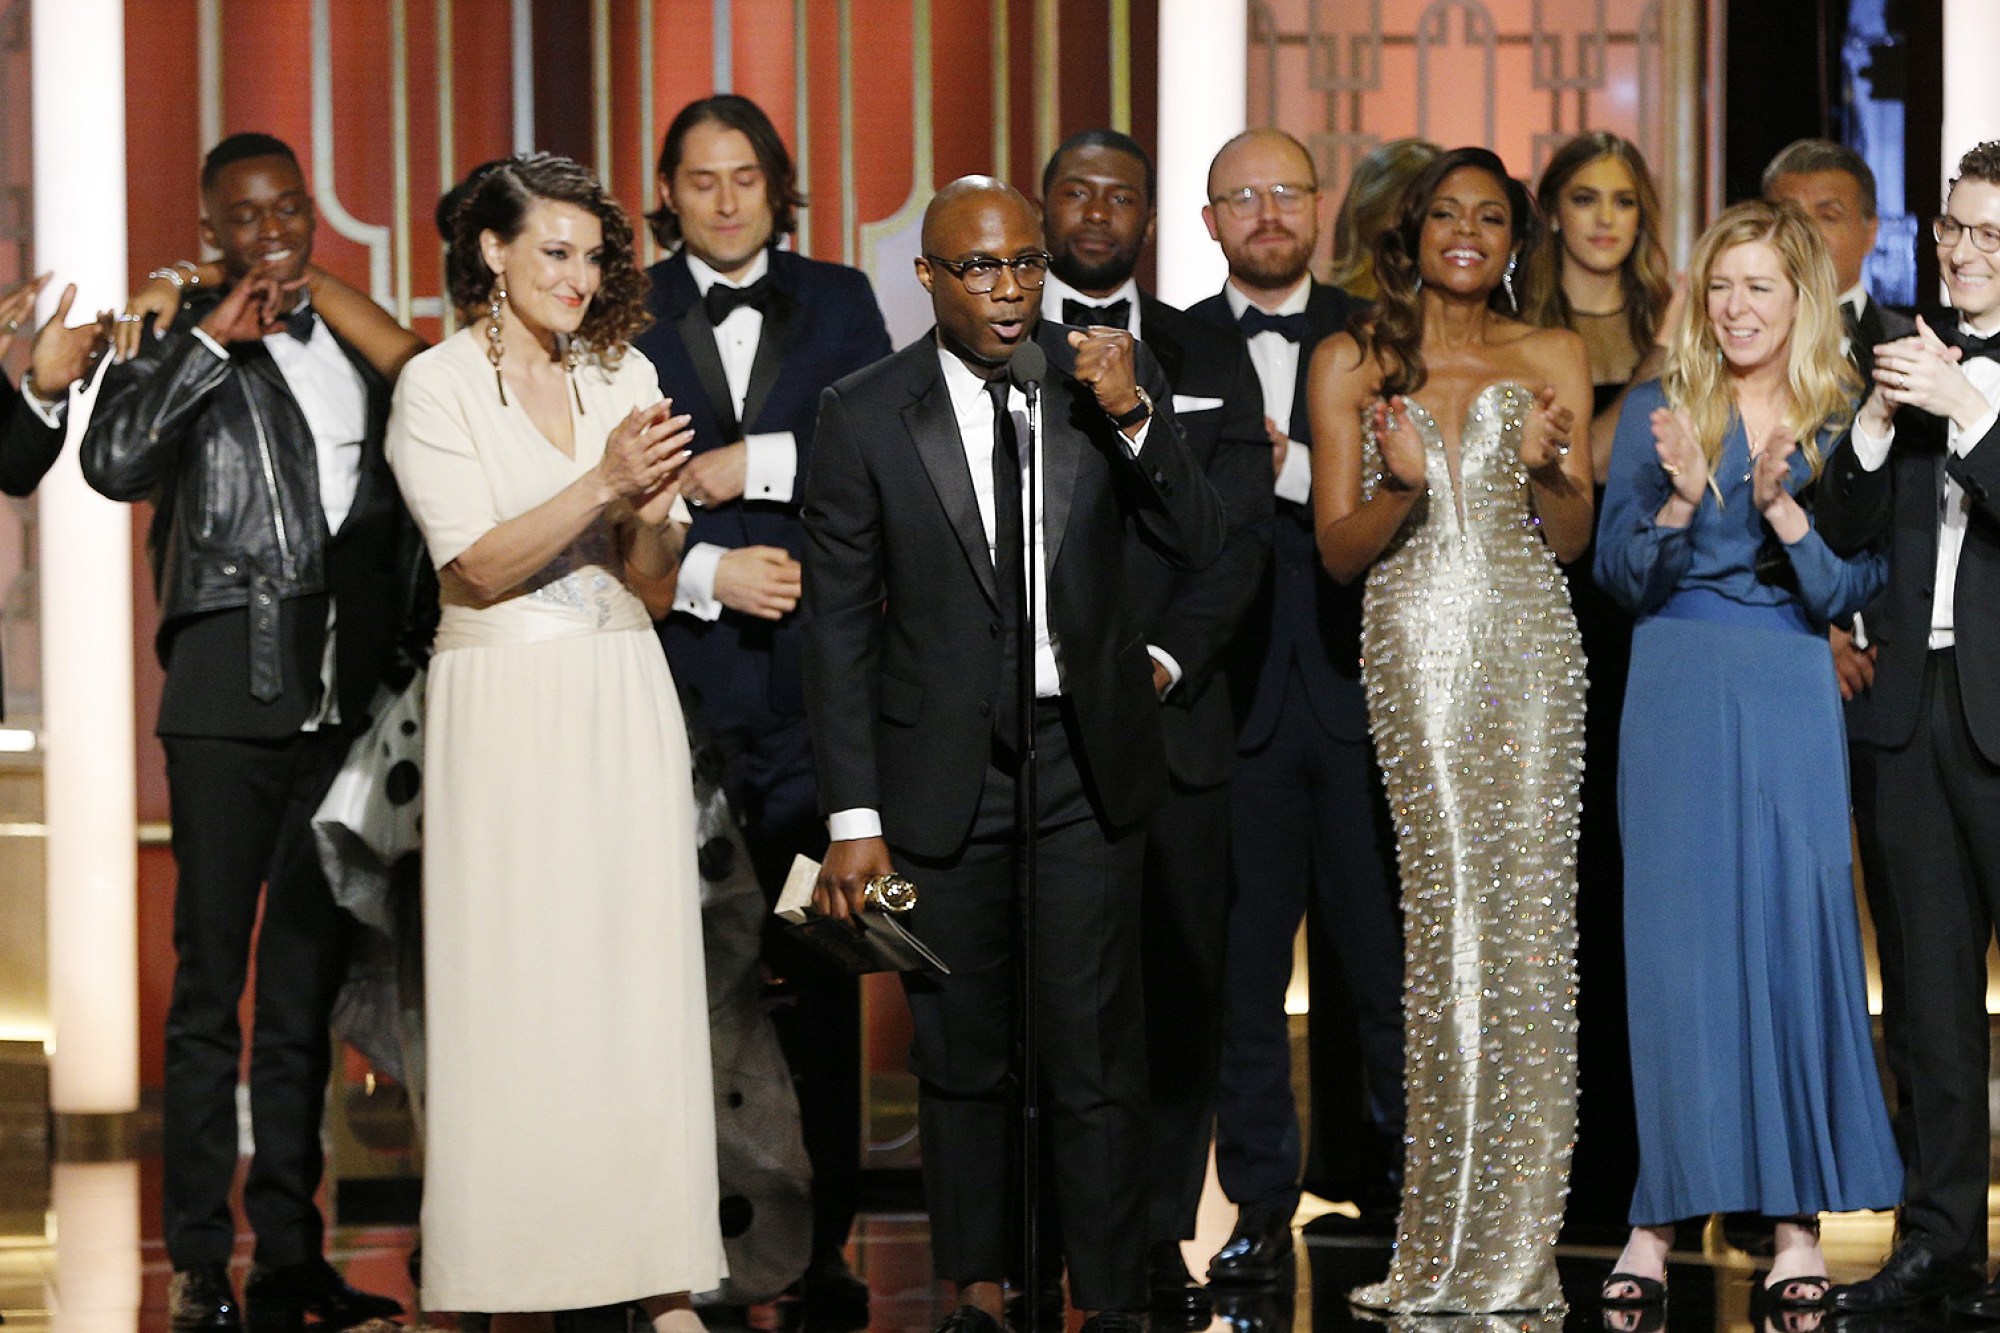 Director Barry Jenkins and the cast and crew of "Moonlight" accept the award for Best Motion Picture - Drama for "Moonlight" onstage during the 74th Annual Golden Globe Awards at The Beverly Hilton Hotel on January 8, 2017 in Beverly Hills, California. (Photo by Paul Drinkwater/NBCUniversal via Getty Images)